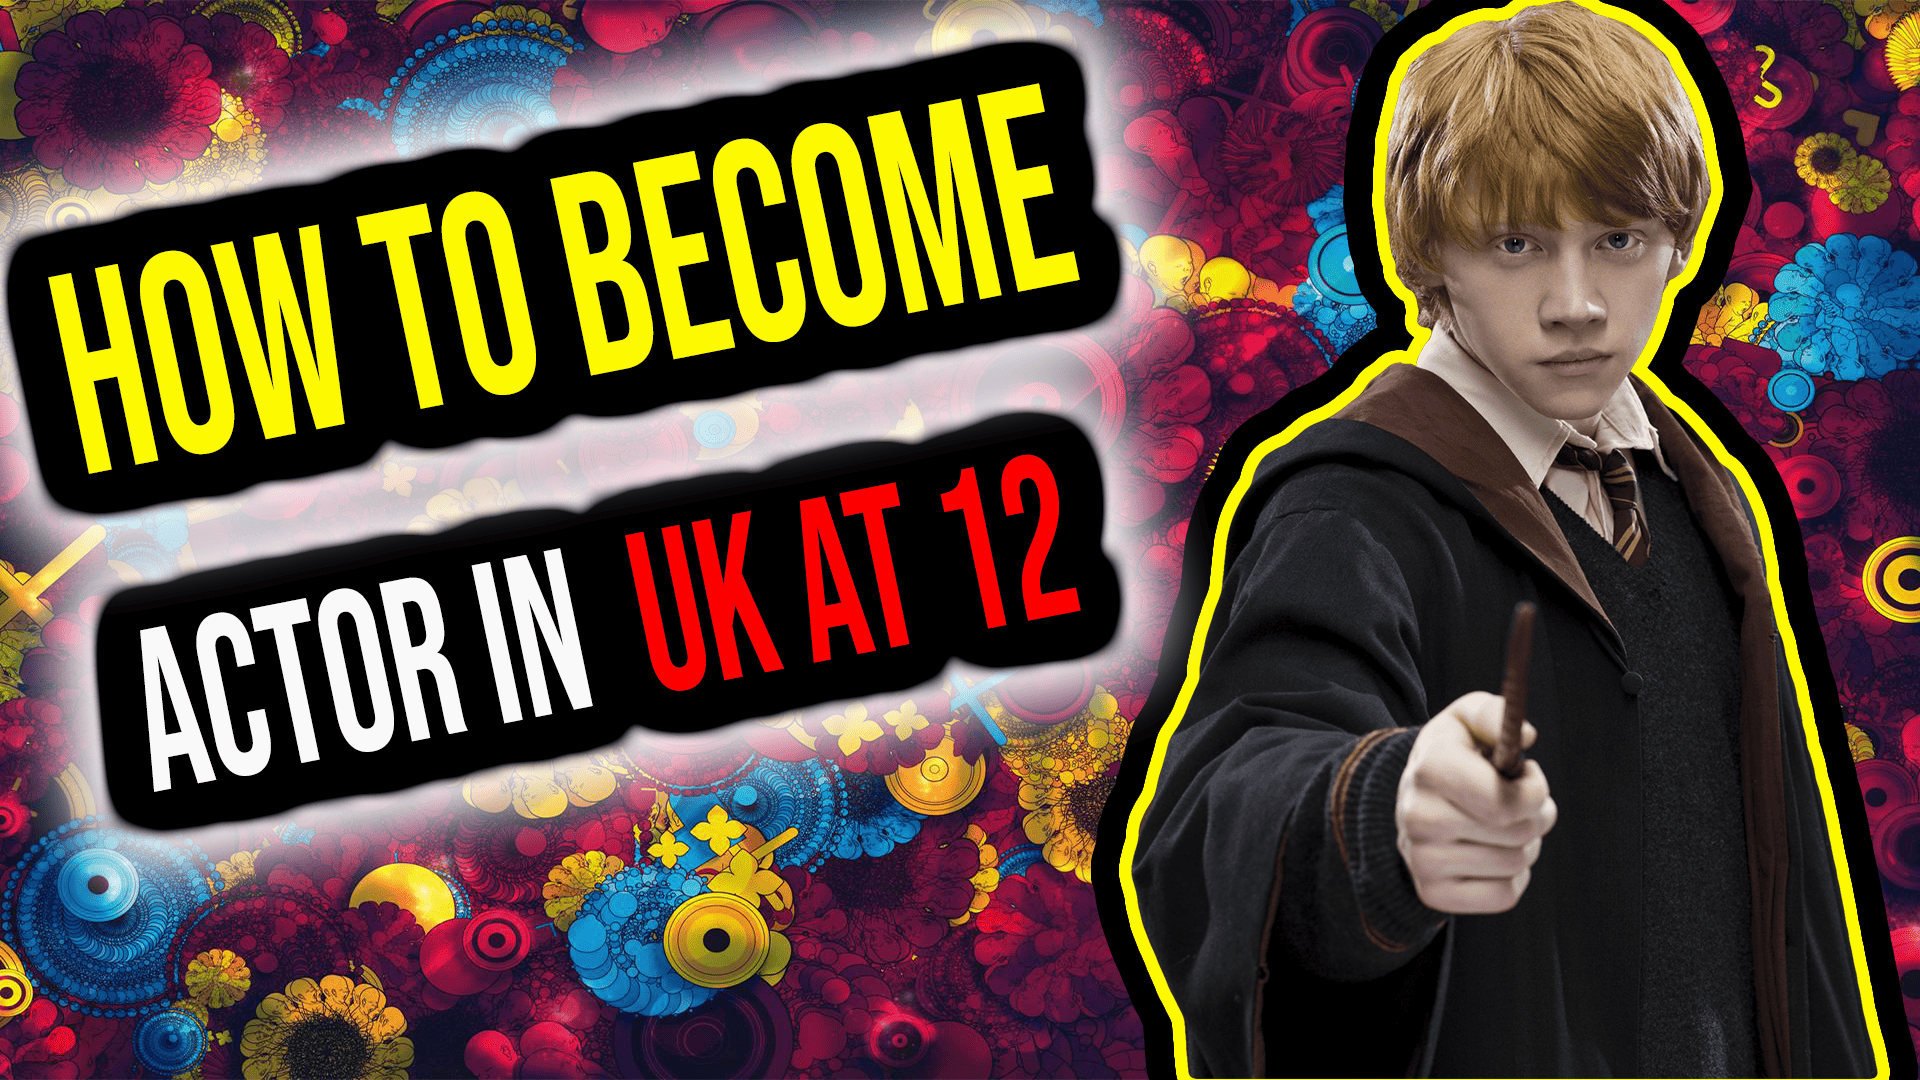 How To Become An Actor In The UK At 12: A Guide For Aspiring Young Performers